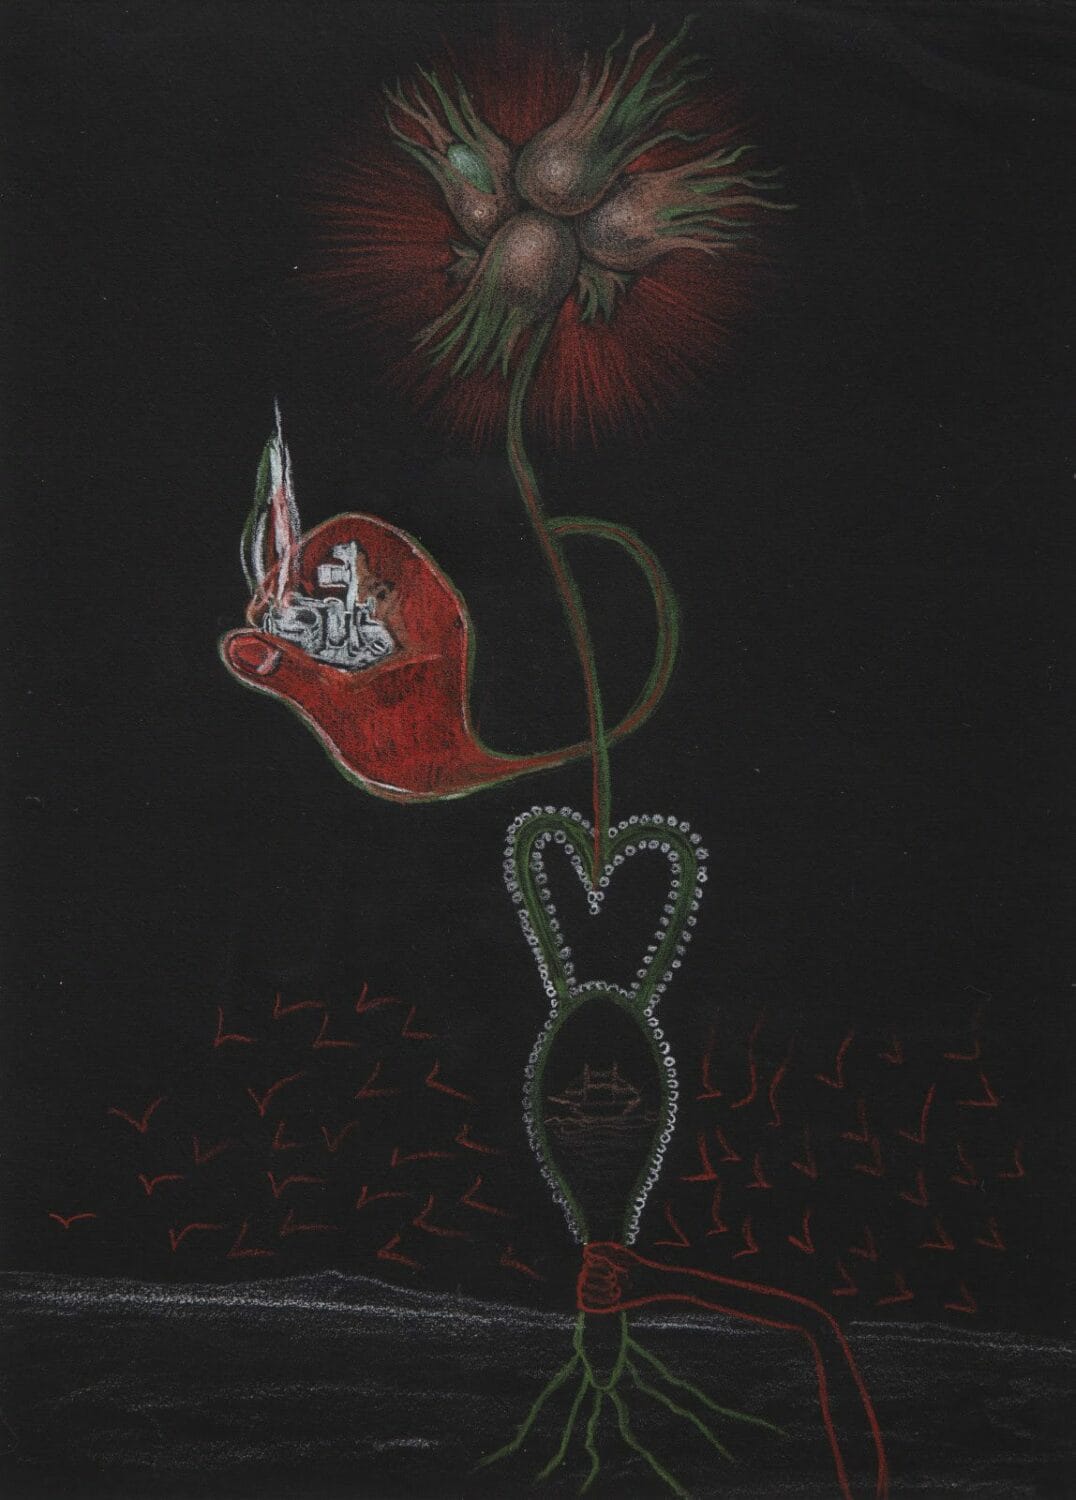 Valentine Hugo, André Breton, Nusch Eluard, Cadavre Exquis, c. 1932, pastel on black construction paper, 12 1/2 x 9 1/2 inches 31.8 x 24.1 cm. Private collection, New York. Photo by Diego Flores.